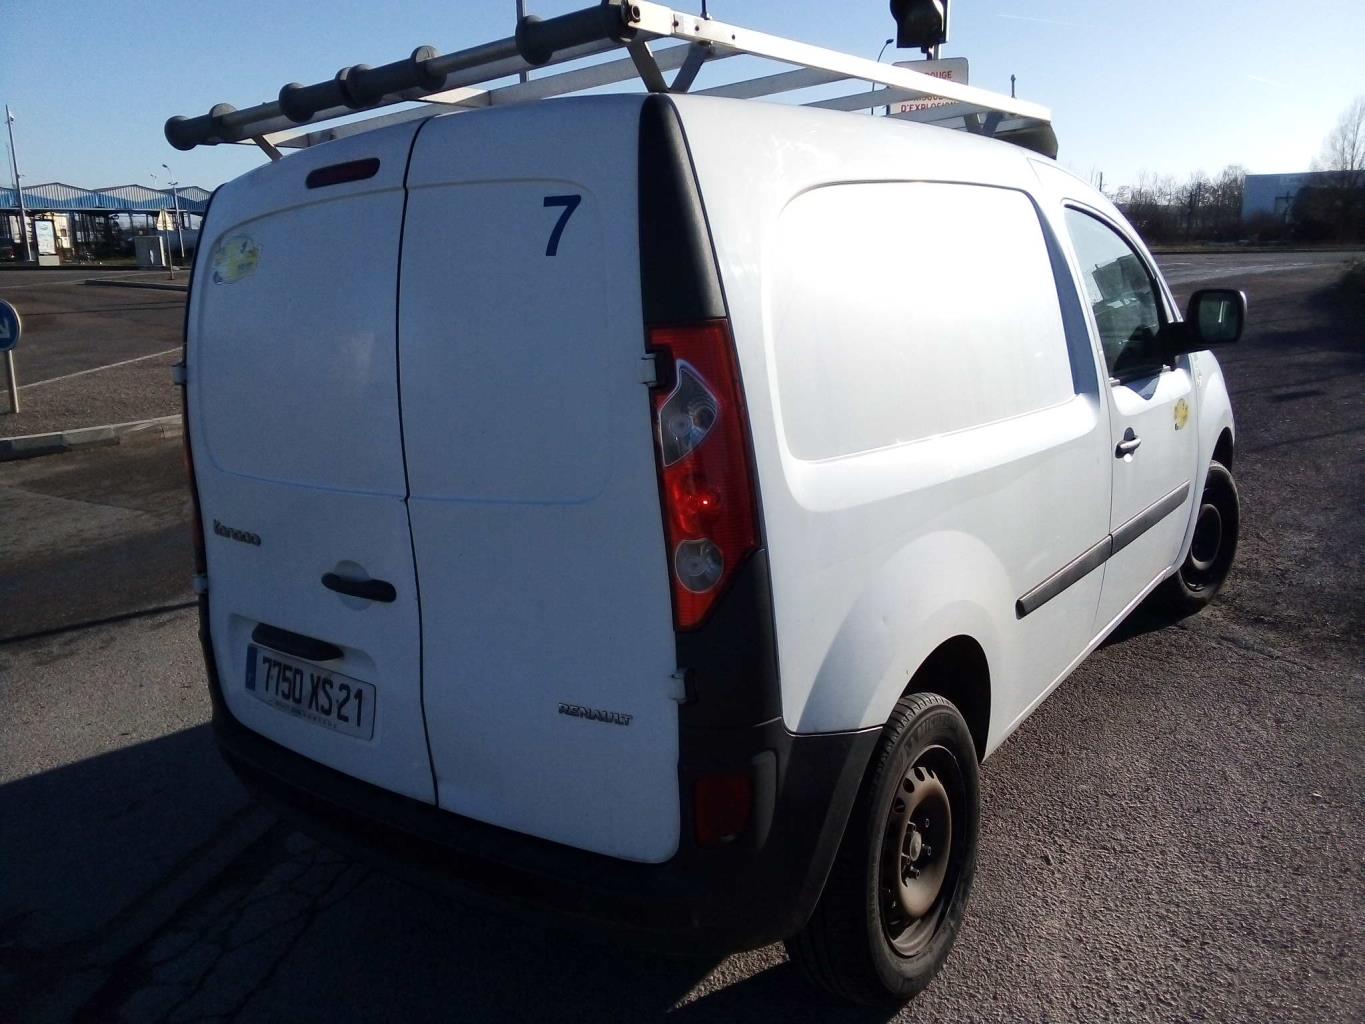 Image Train arriere complet - RENAULT KANGOO 2